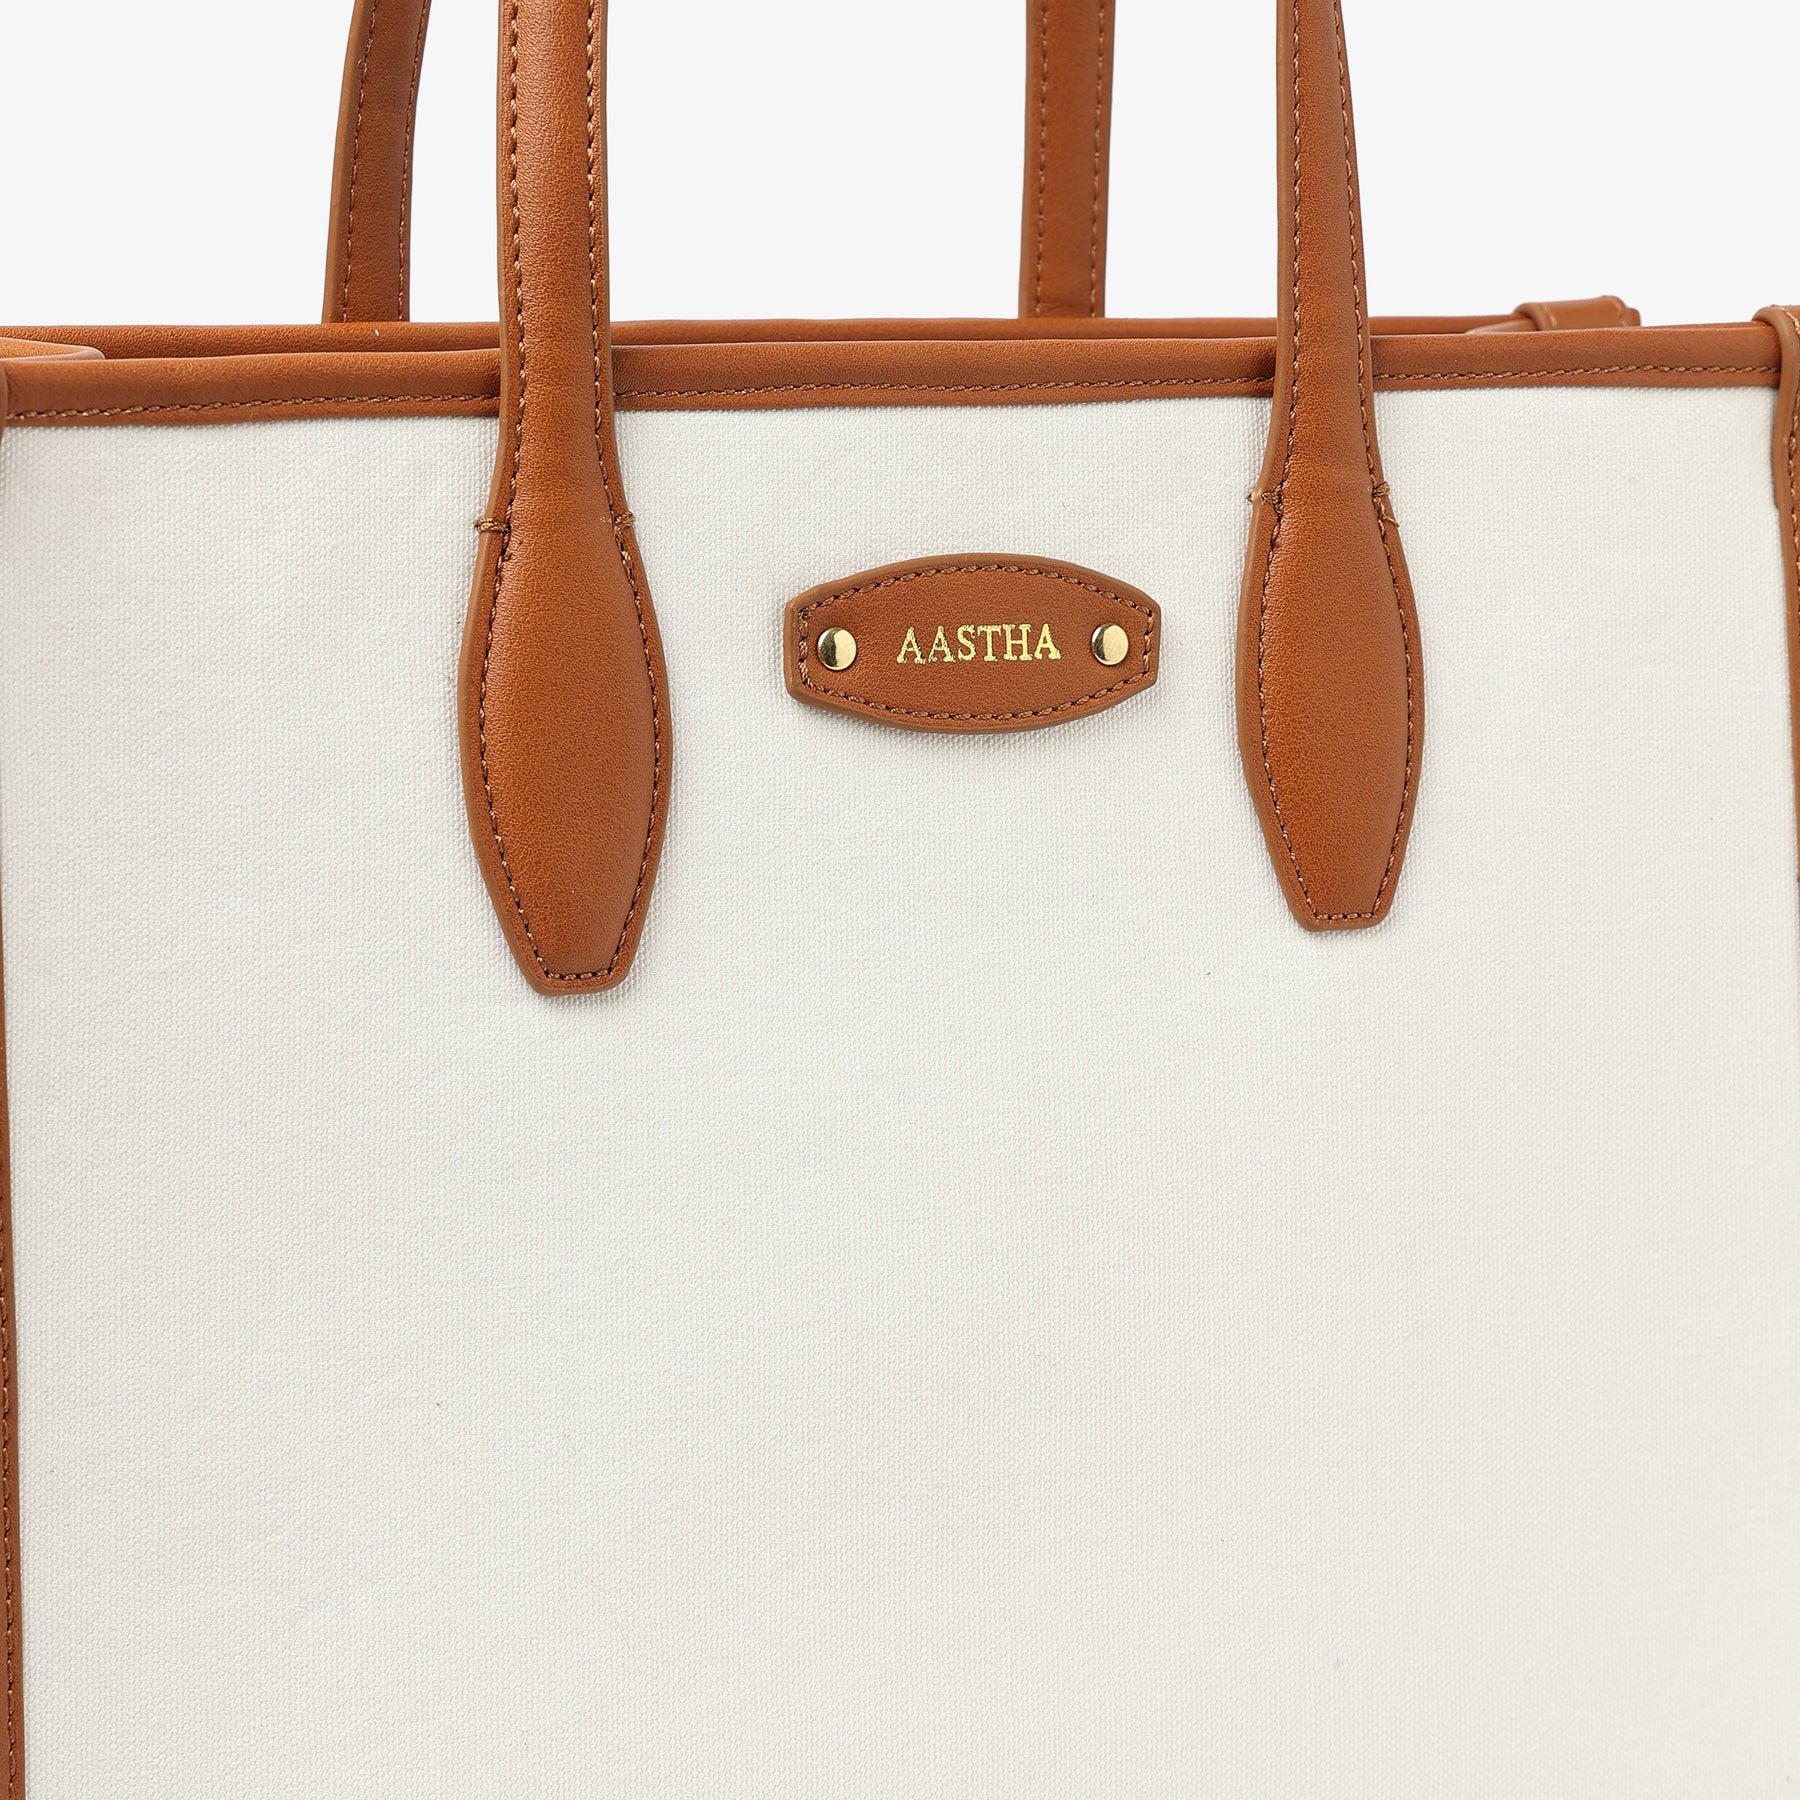 Personalised Everyday Work Tote - White